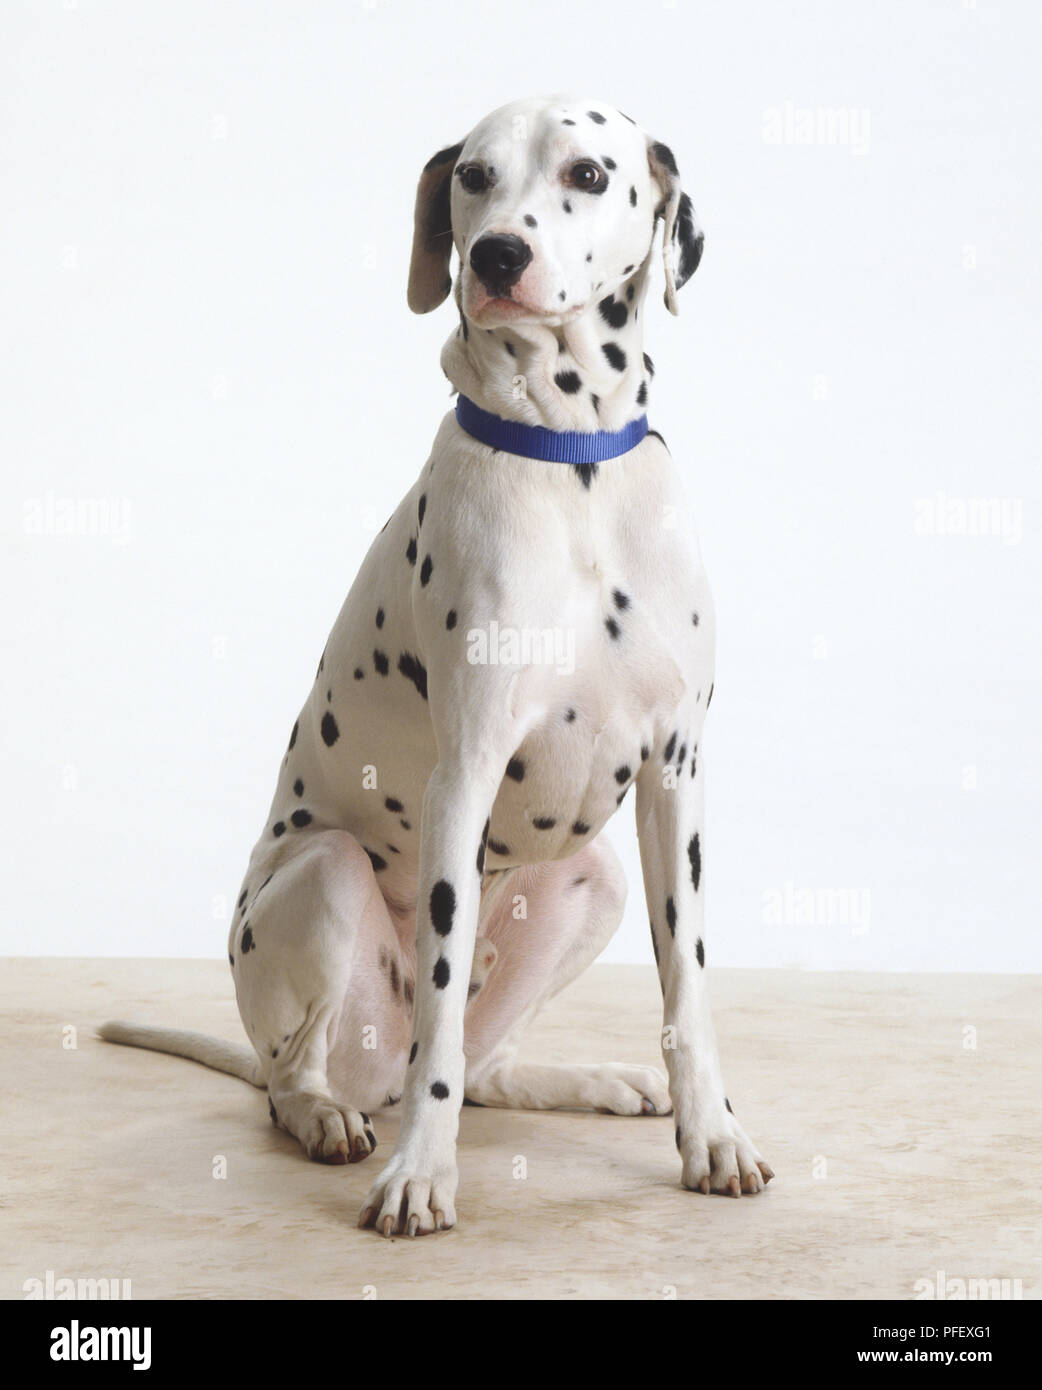 Sitzung Dalmatiens. Hund (Canis familiaris), Low Angle View Stockfoto